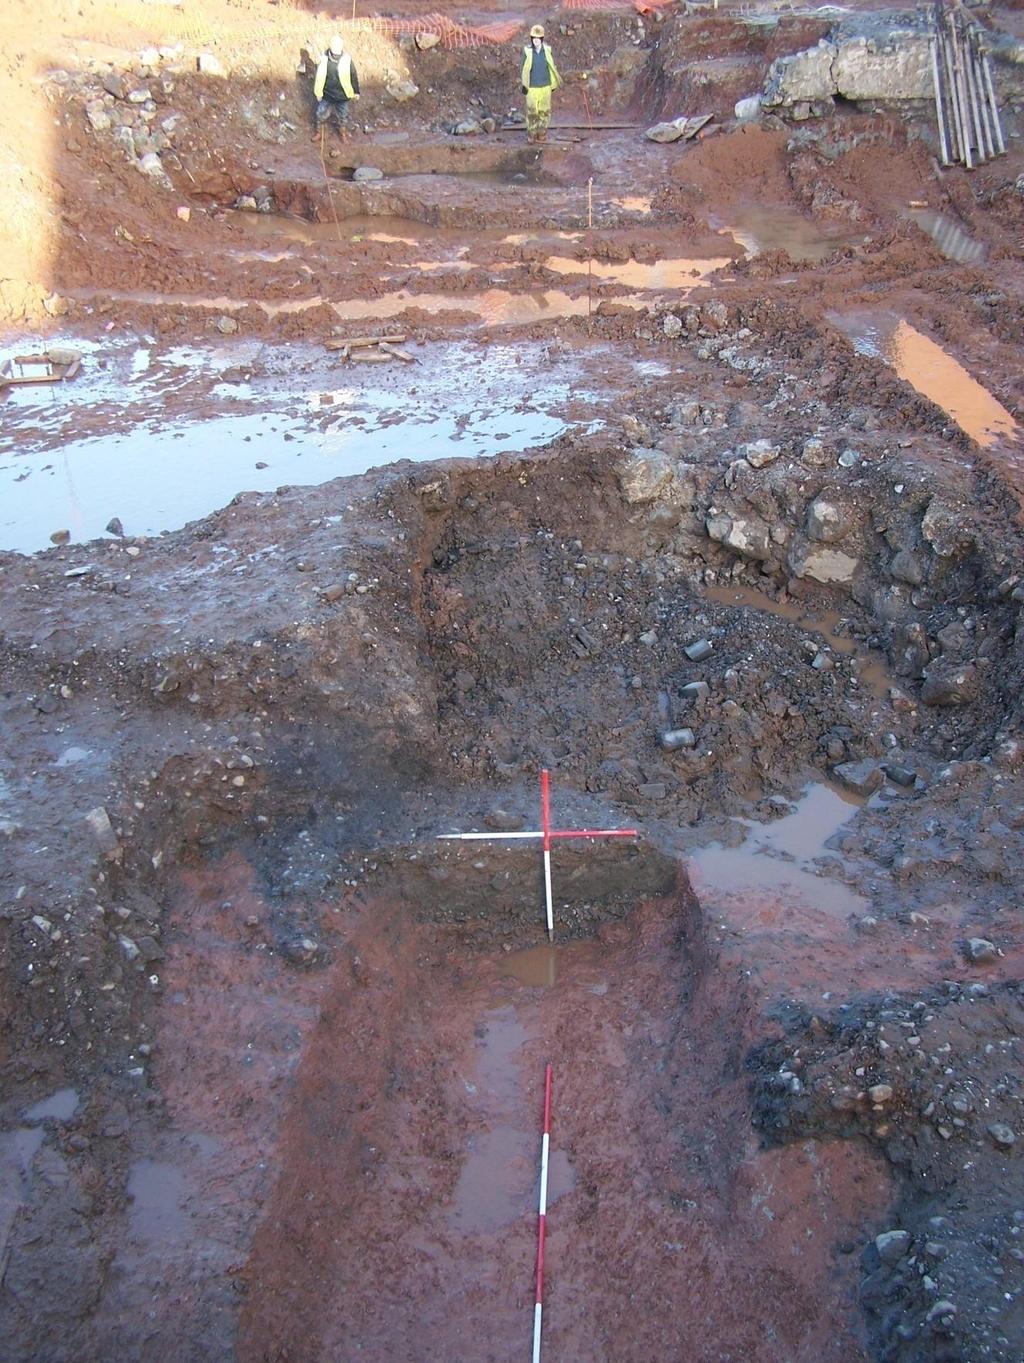 Plate 8. Two. The full extent of the excavated Tudor-period ditch. The image shows the ditch clearly narrowing to the north.